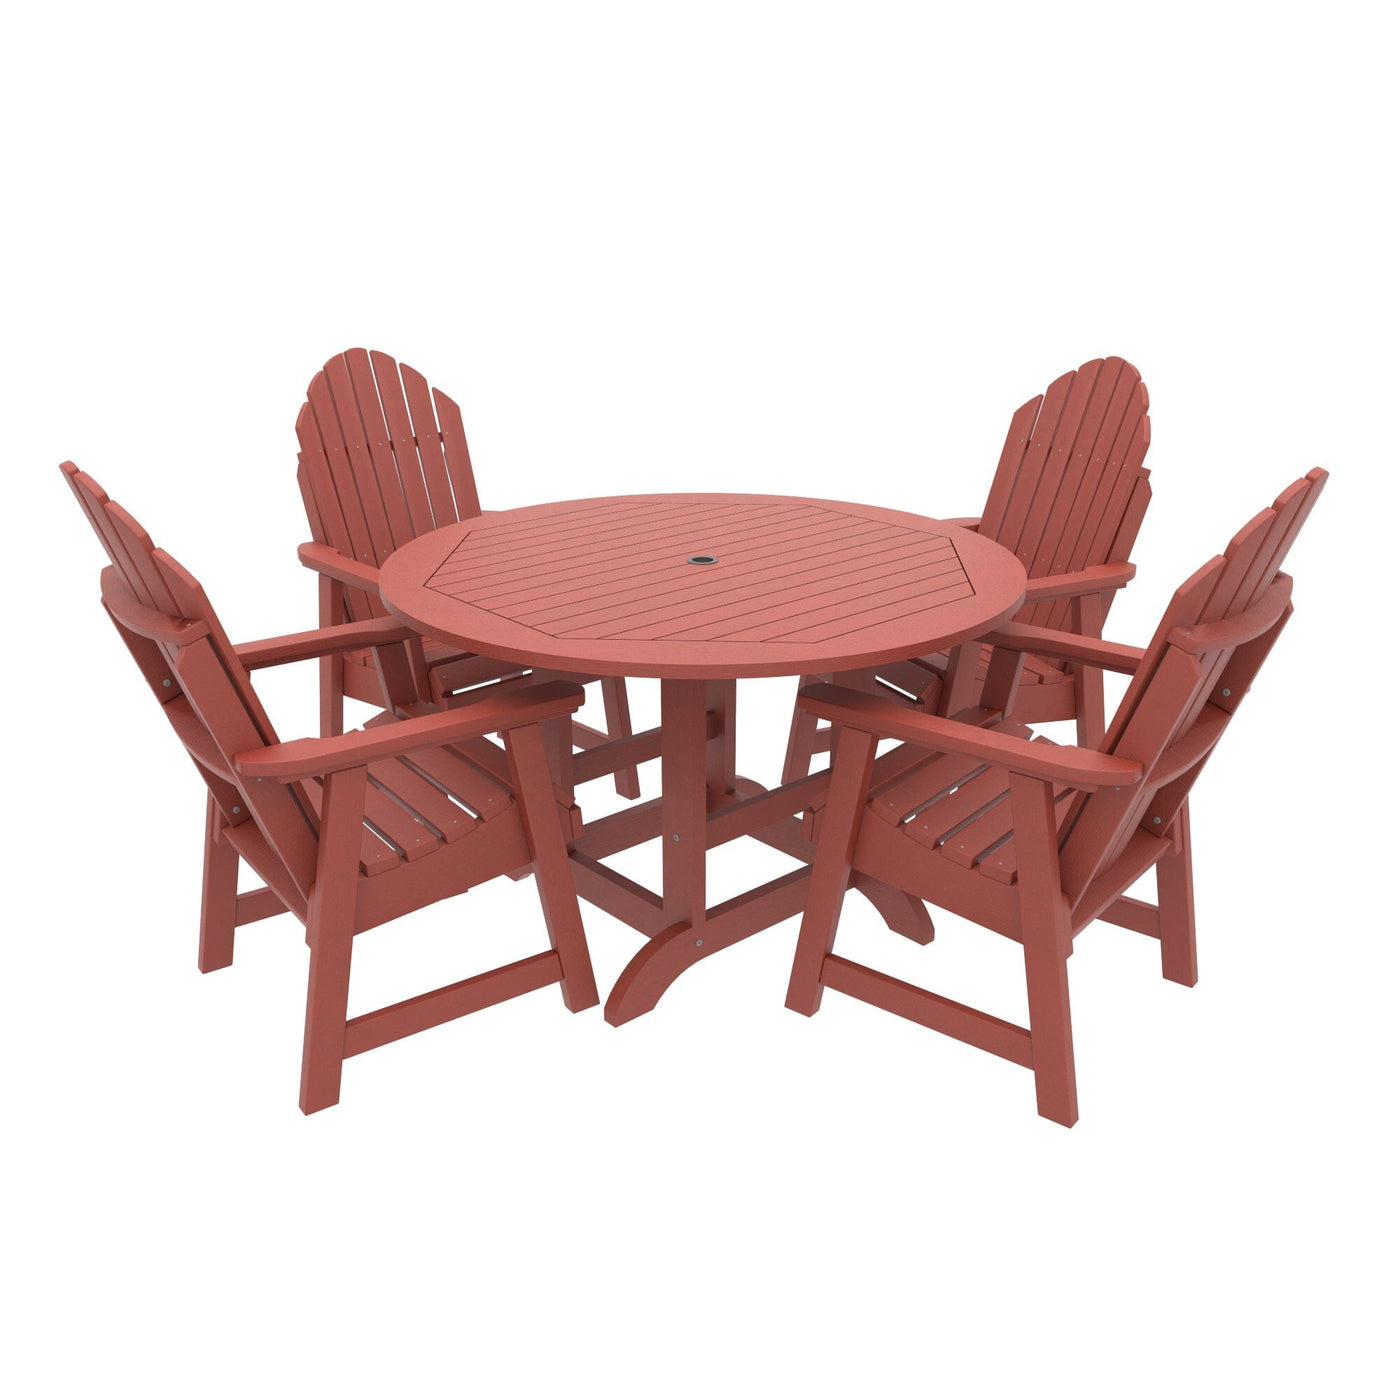 Commercial Grade 5 Pc Muskoka Adirondack Dining Set with 48” Table Kitted Sets Sequoia Professional Rustic Red 